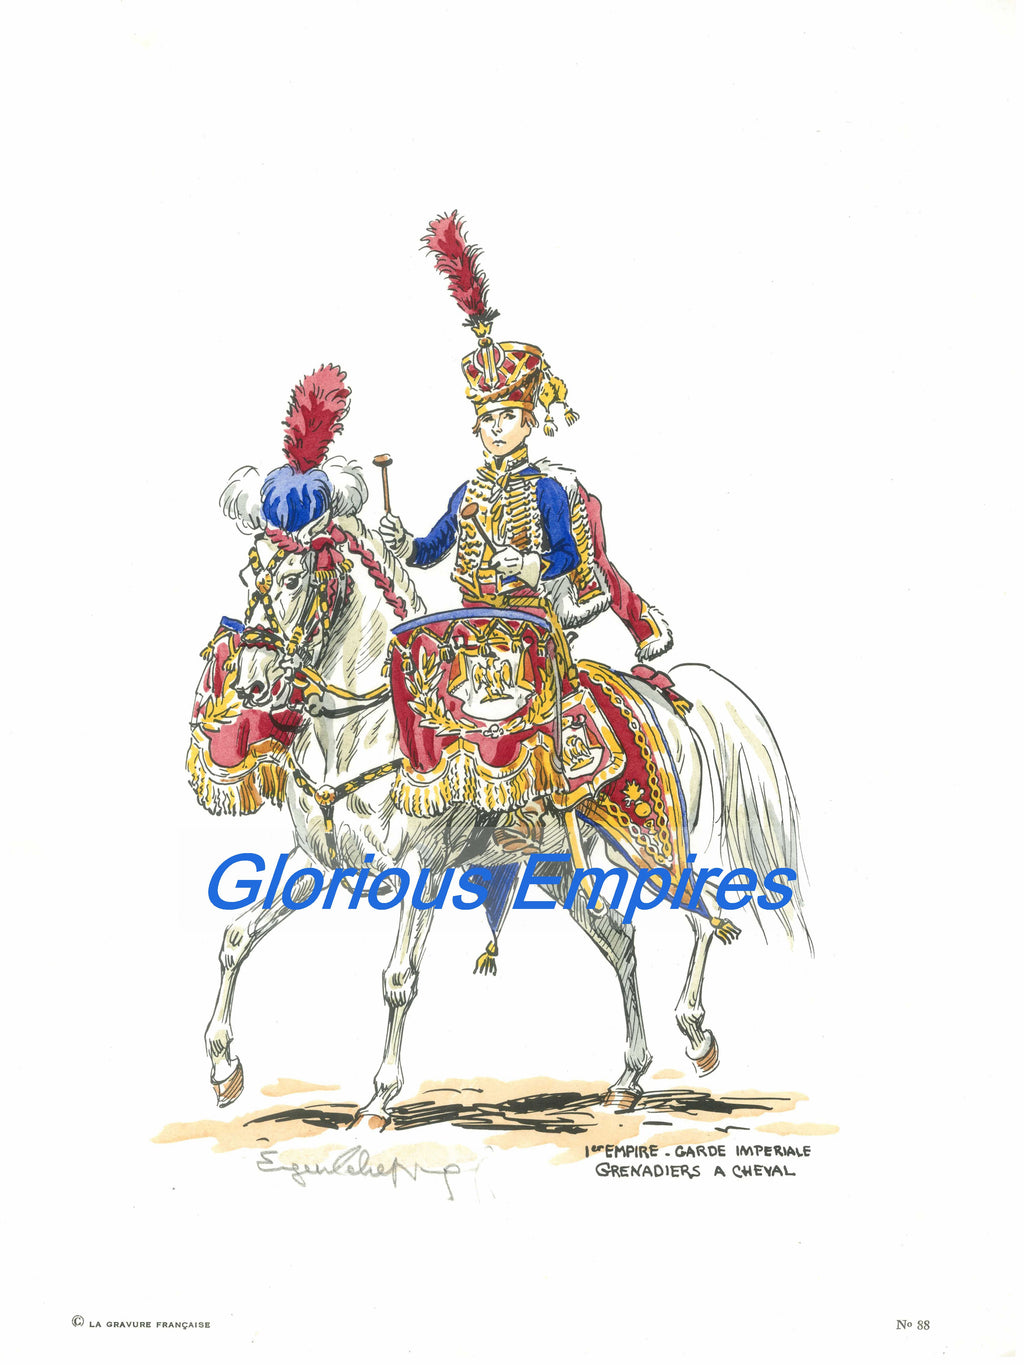 print 88 : Garde Imperial Grenadiers a cheval - Glorious Empires-Historical Miniatures  